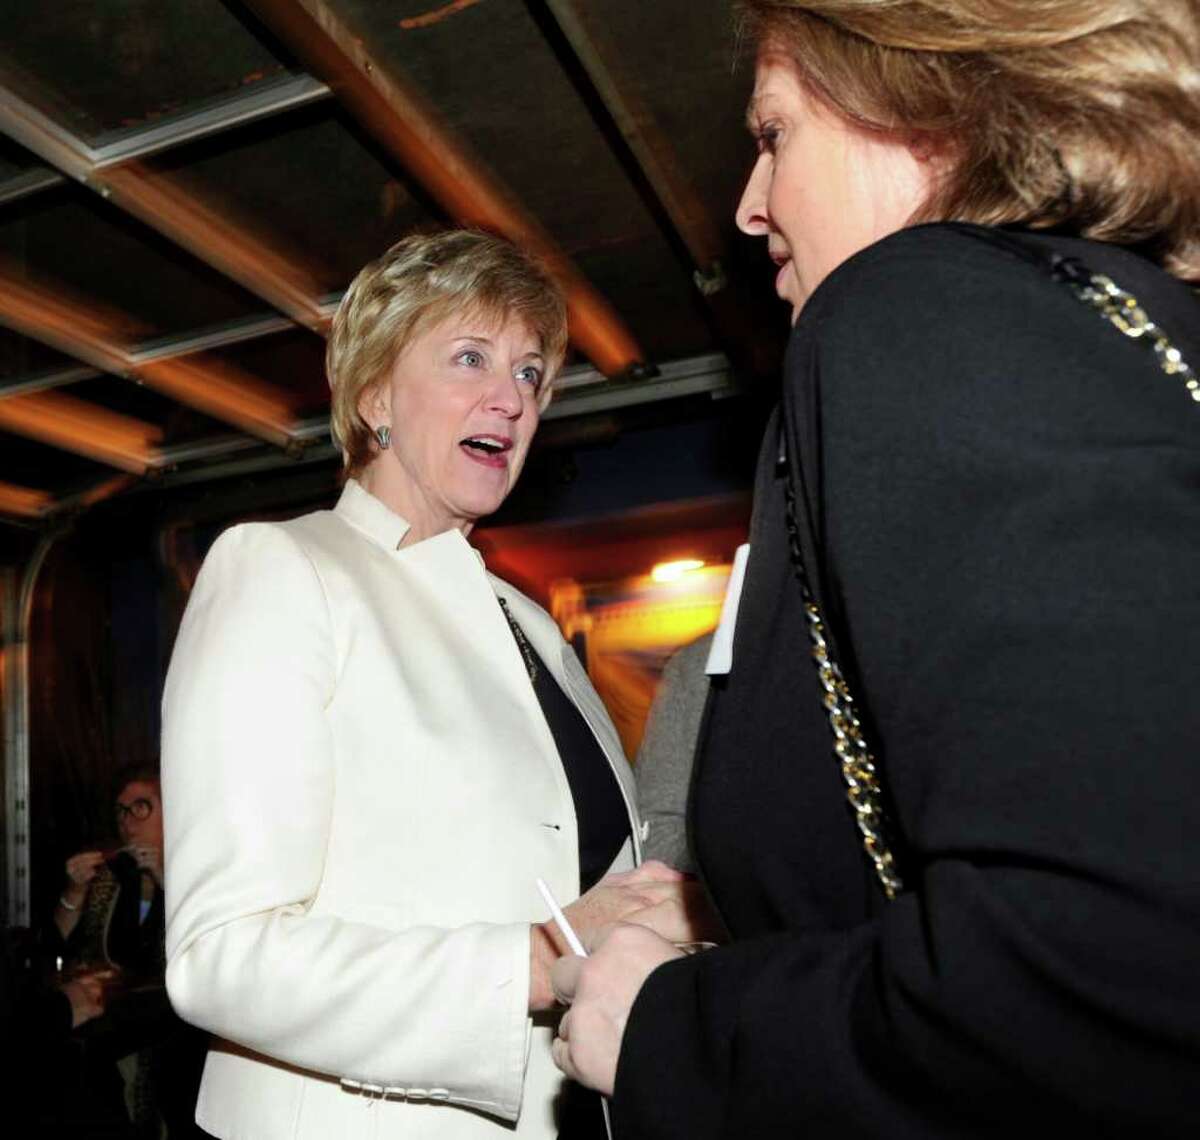 Republican U.S. Senate candidate Linda McMahon, left, meets Clare Powell of Stamford during an appearance at SBC Restaurant & Brewery in Stamford, Thursday night, Feb. 2, 2012.